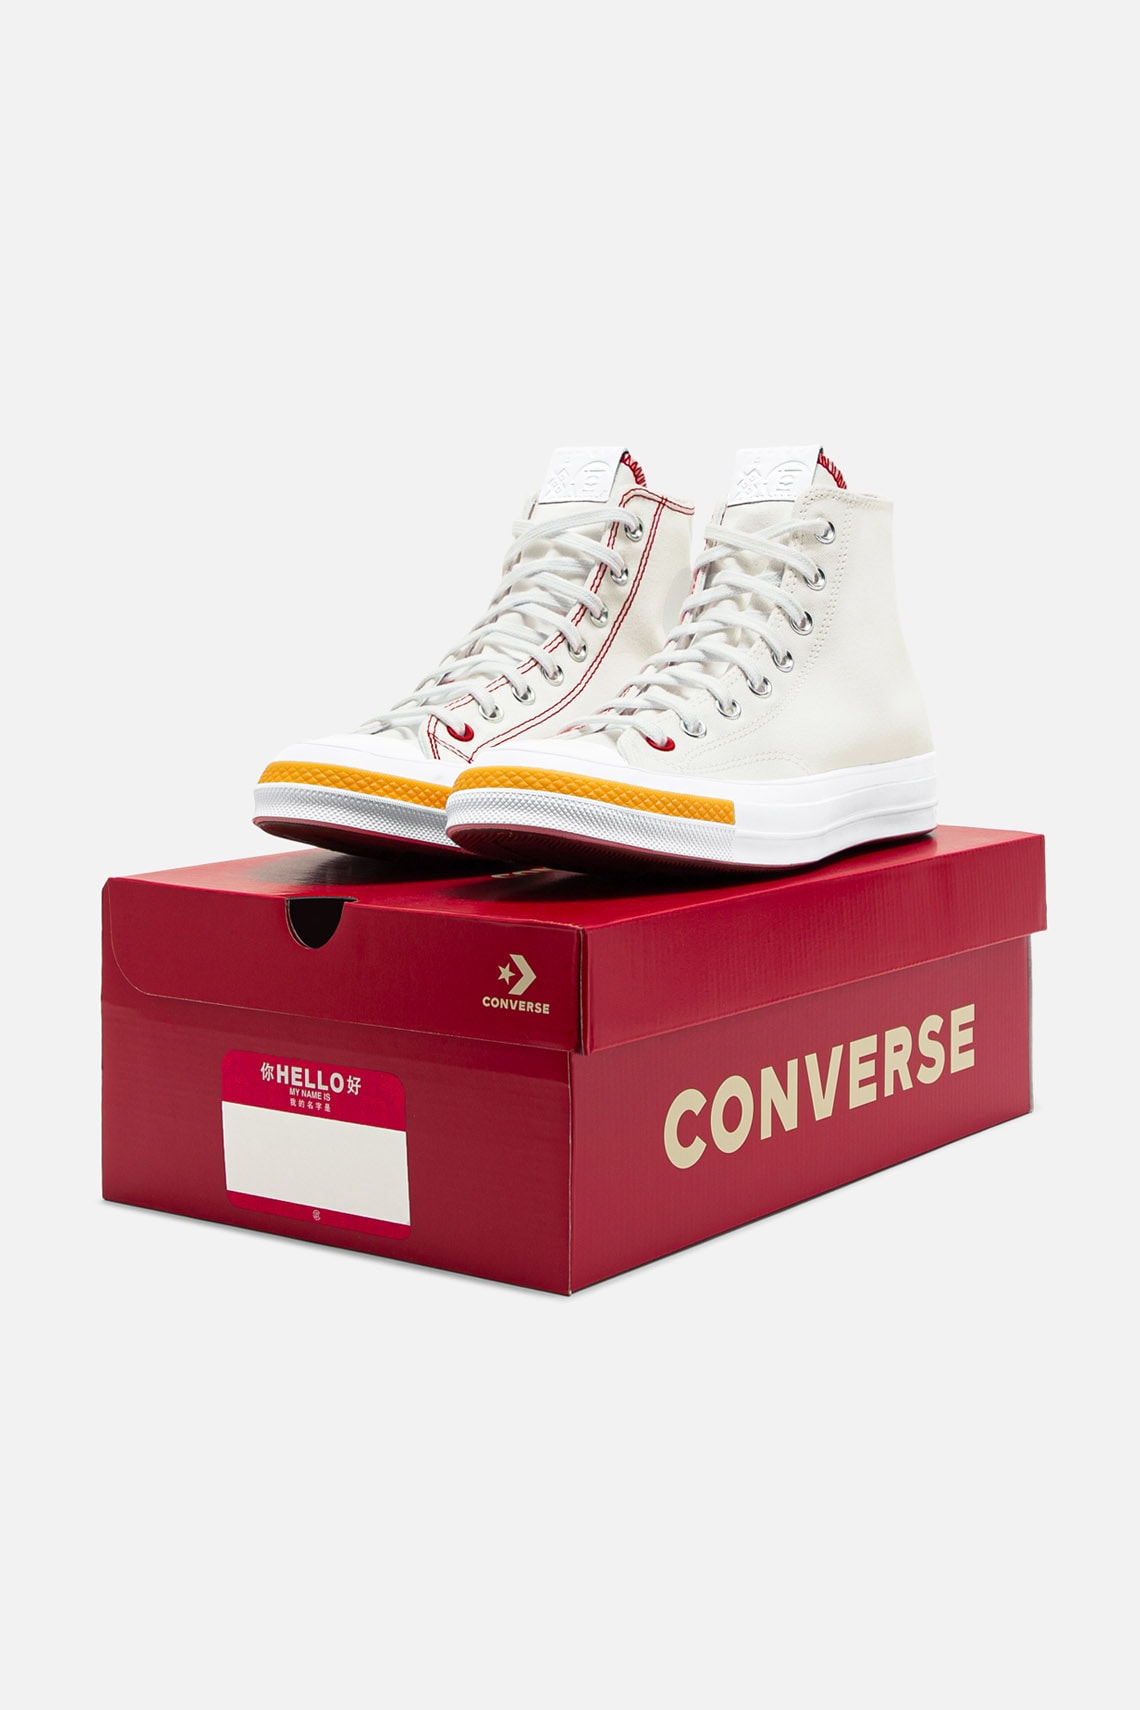 CLOT x Converse Chuck 70 Hi and Ox Collaboration Sneakers Paloma Gray White